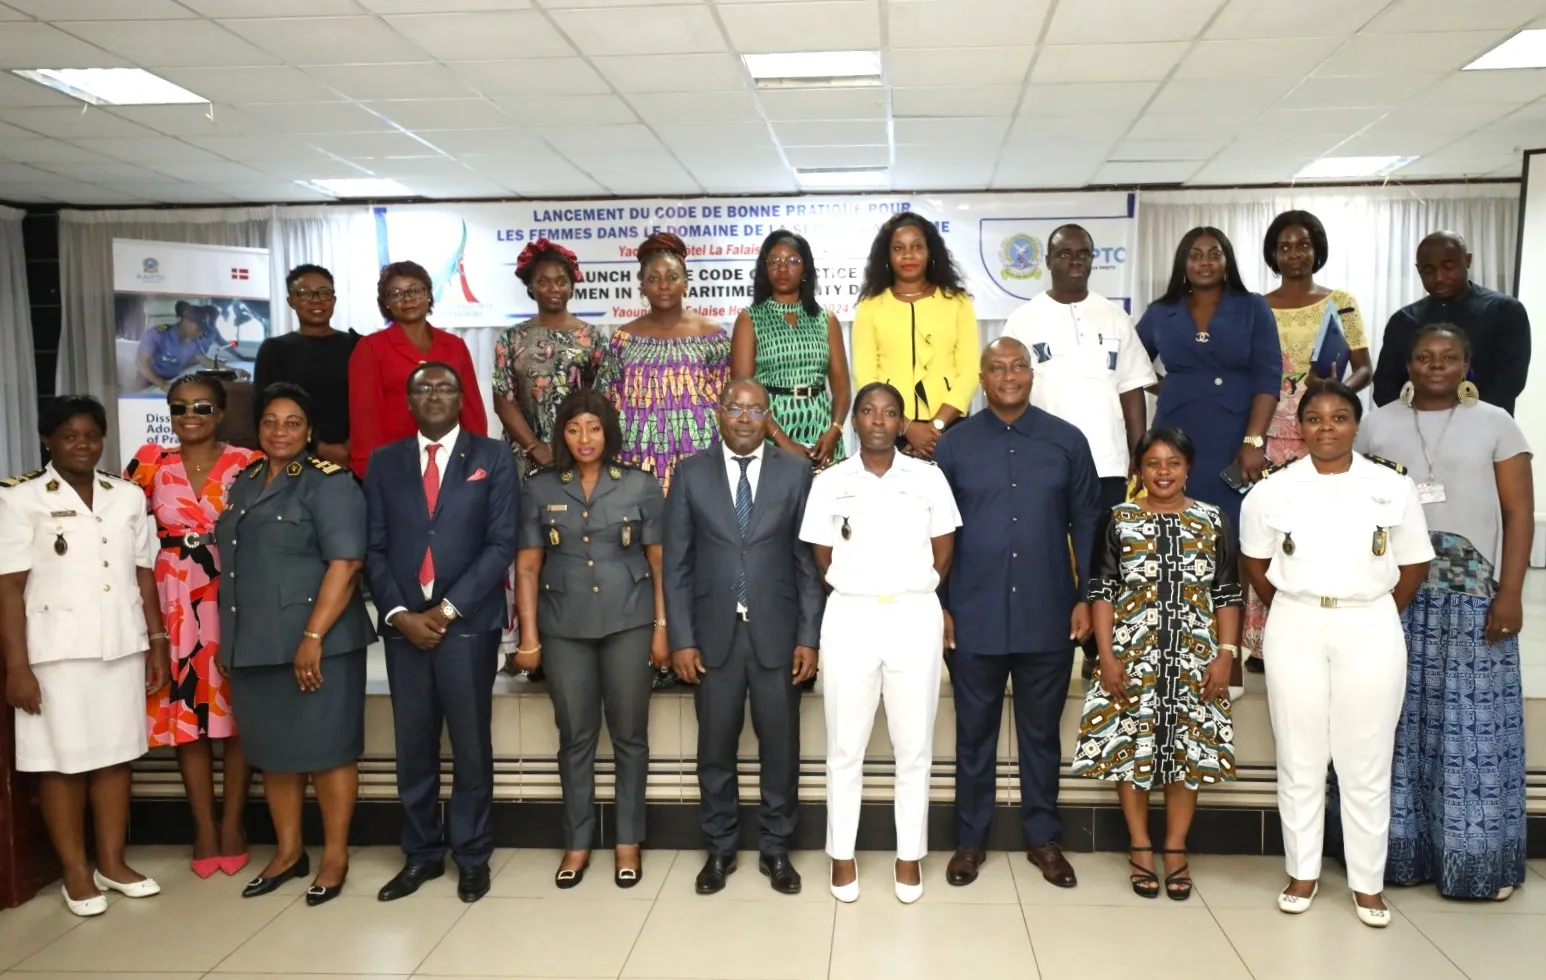 Kofi Anan Centre Moves To Protect Women In African Maritime